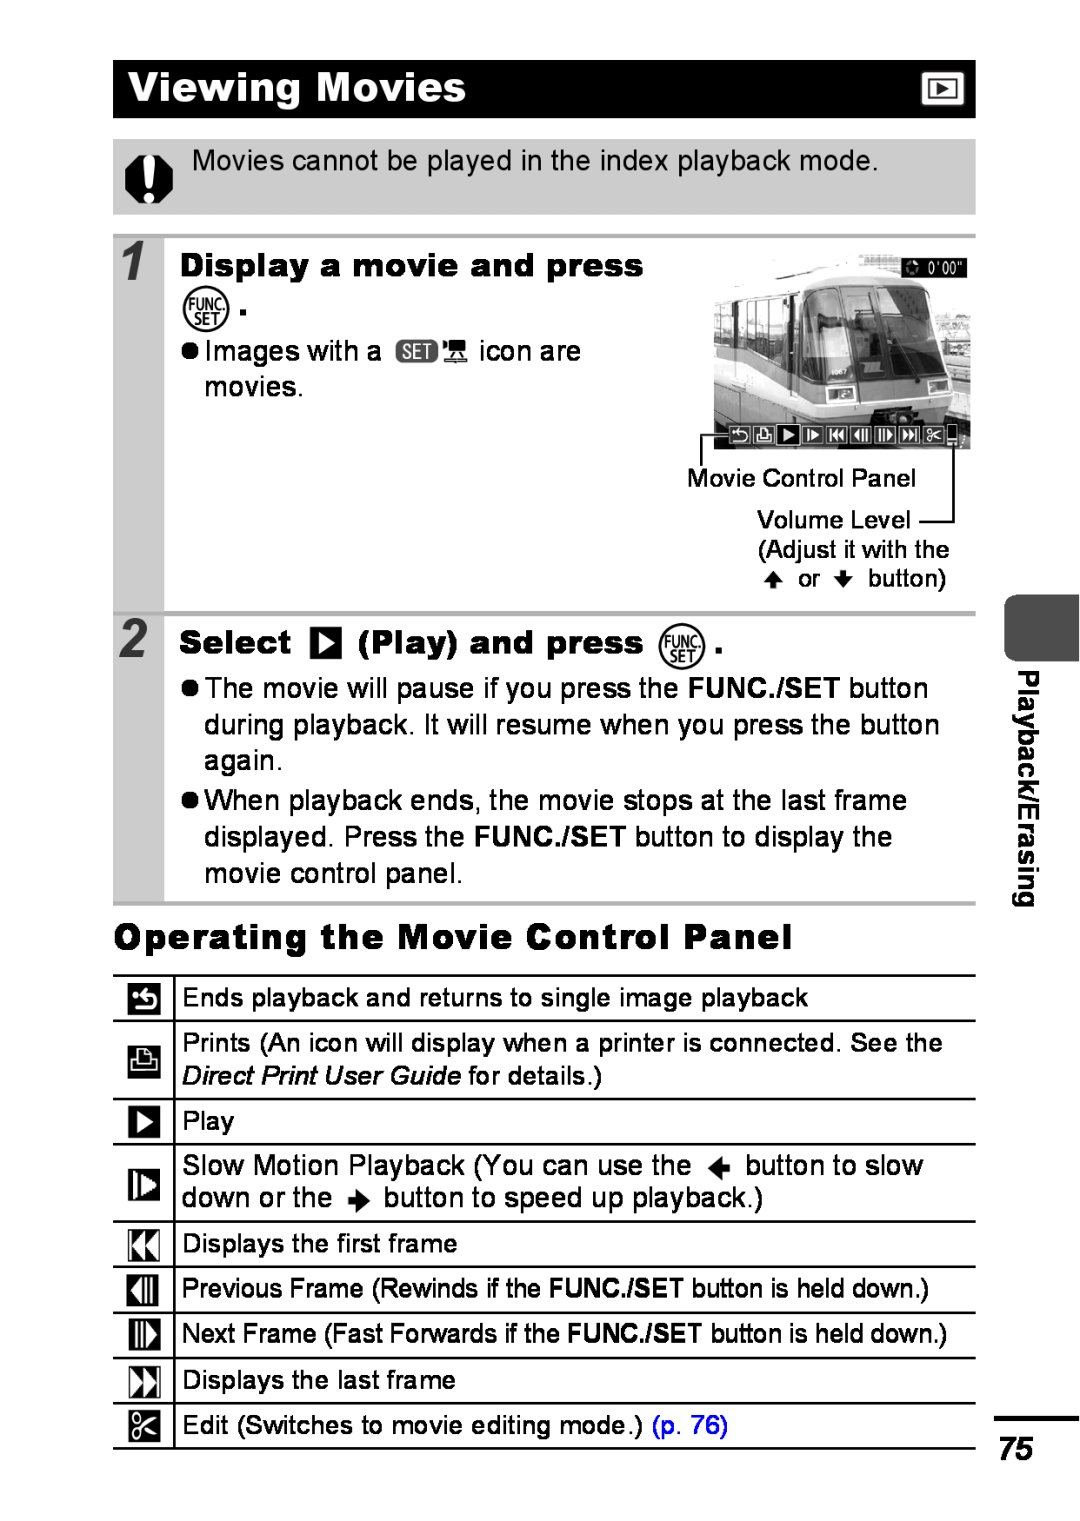 Canon A540 appendix Viewing Movies, Operating the Movie Control Panel, Display a movie and press, Select Play and press 